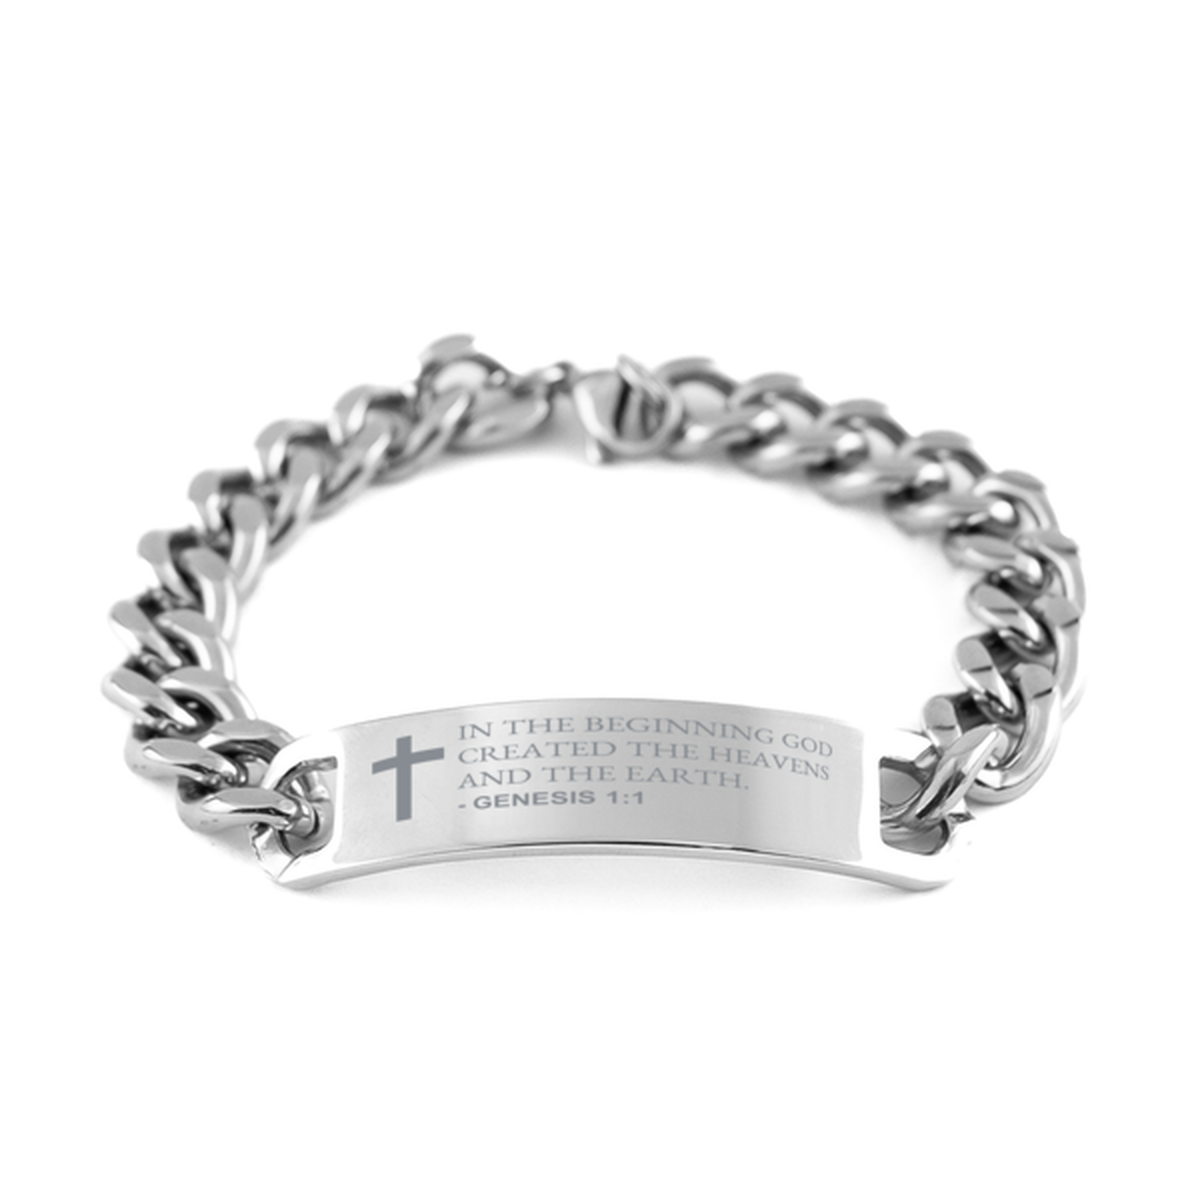 Bible Verse Chain Stainless Steel Bracelet, Genesis 1:1 In The Beginning God Created The Heavens And The, Inspirational Christian Gifts For Men Women